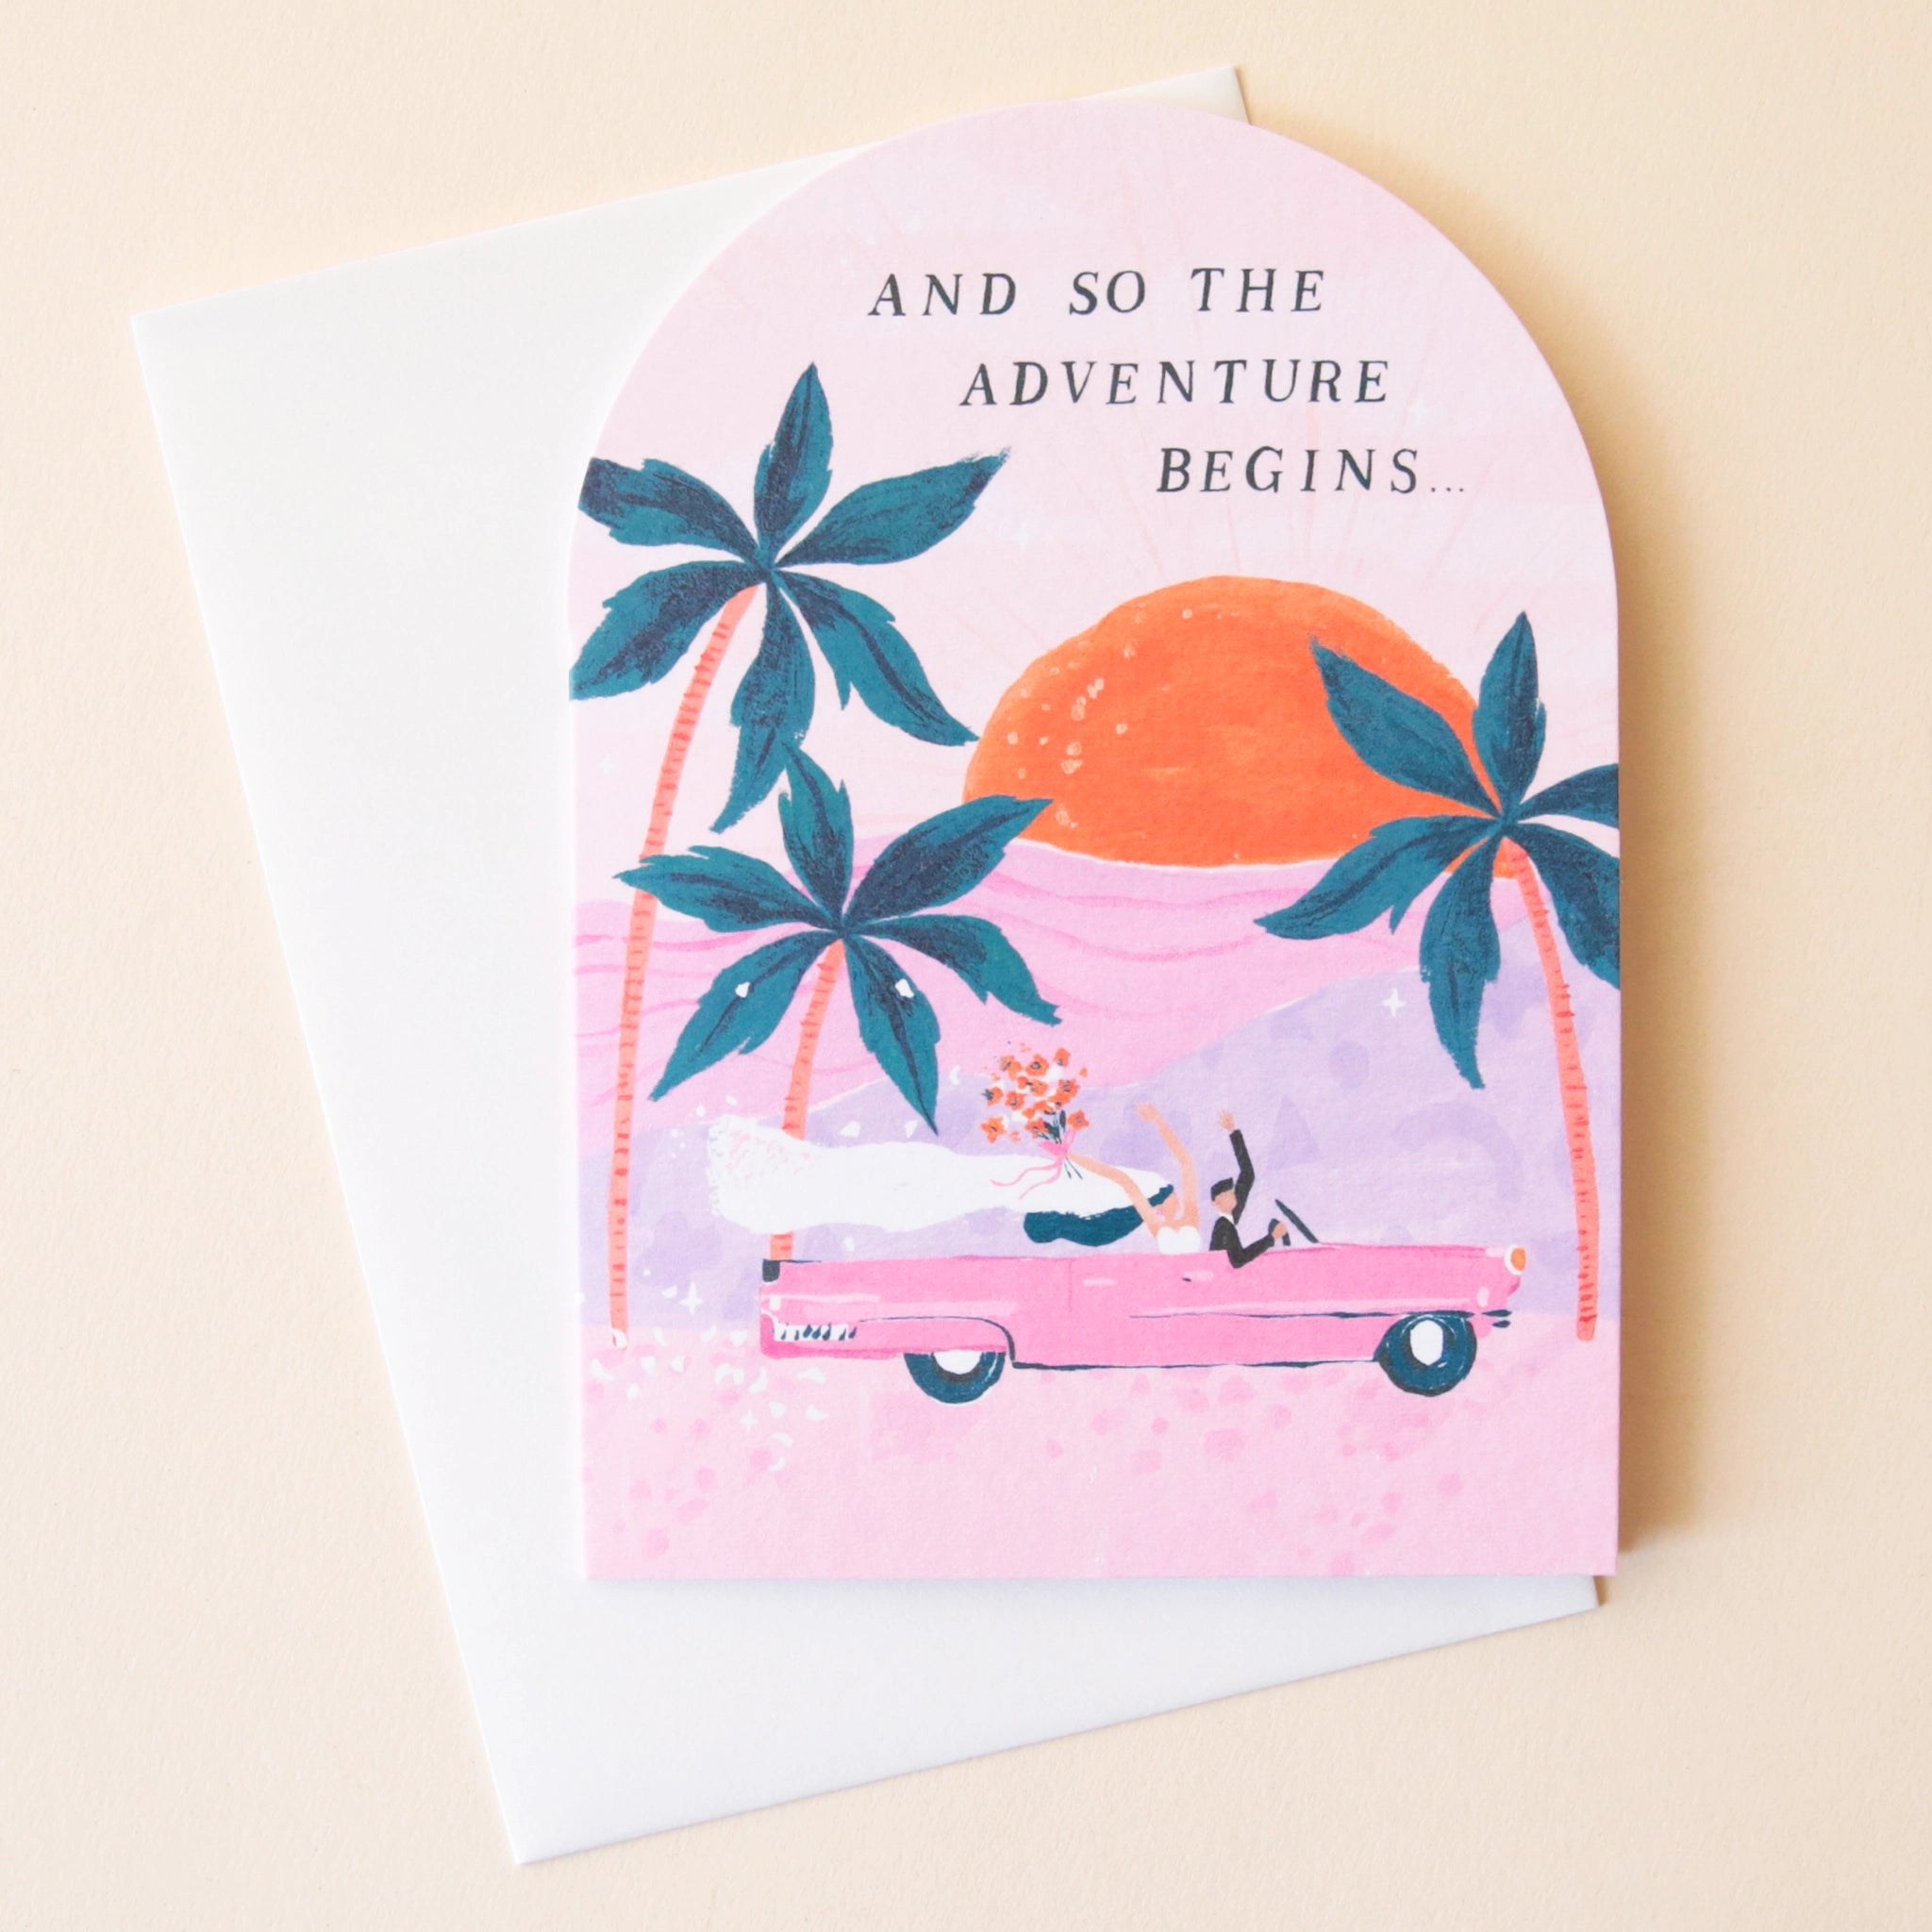 A pink arched greeting card featuring three palm tree illustrations along with a pink vintage car riding into the sunset with a bride and groom holding their hands and bouquets in the air as well as text that reads, "And So The Adventure Begins..." in black letters.